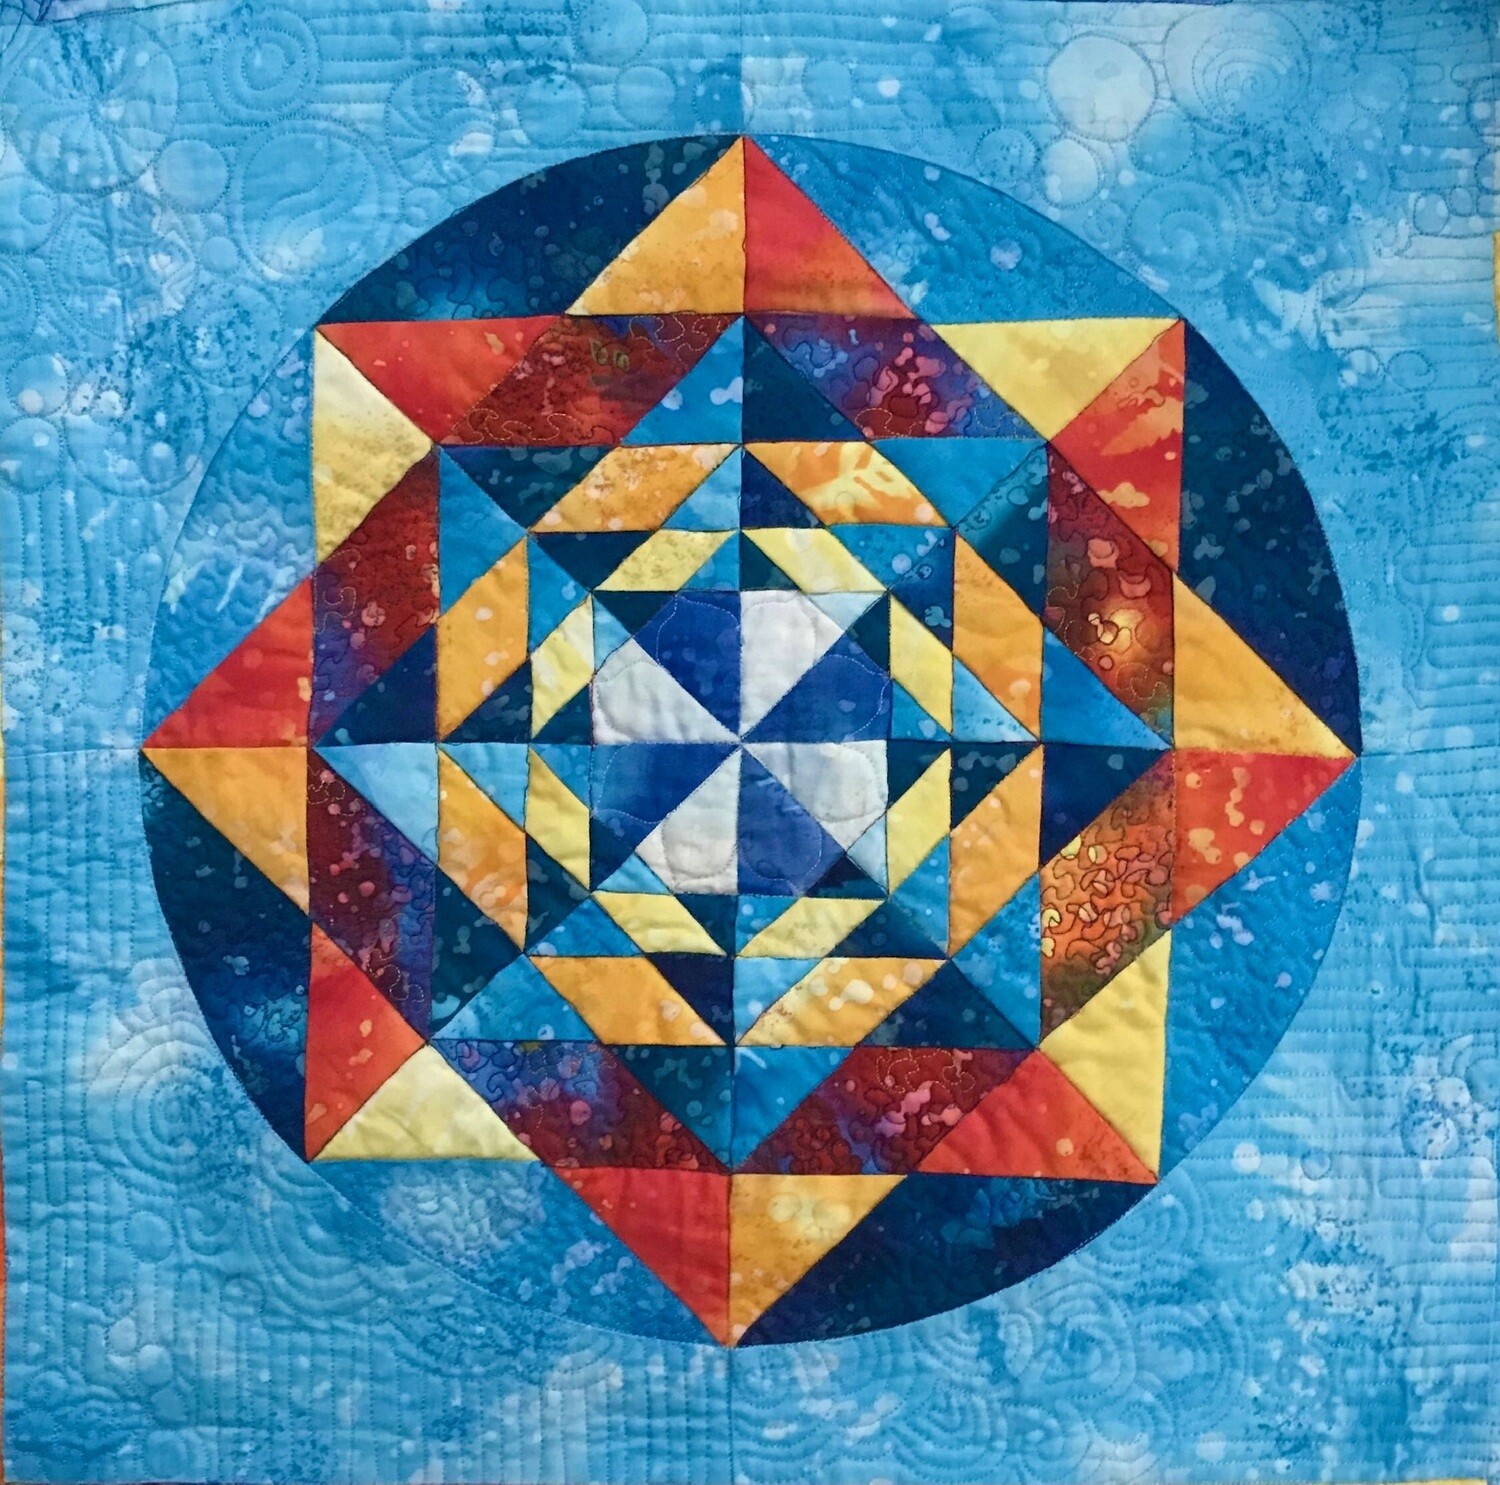 Downloadable Foundation Paper Piecing Pattern Instructions for the ALMOST-FRACTAL MANDALA Quilt Block